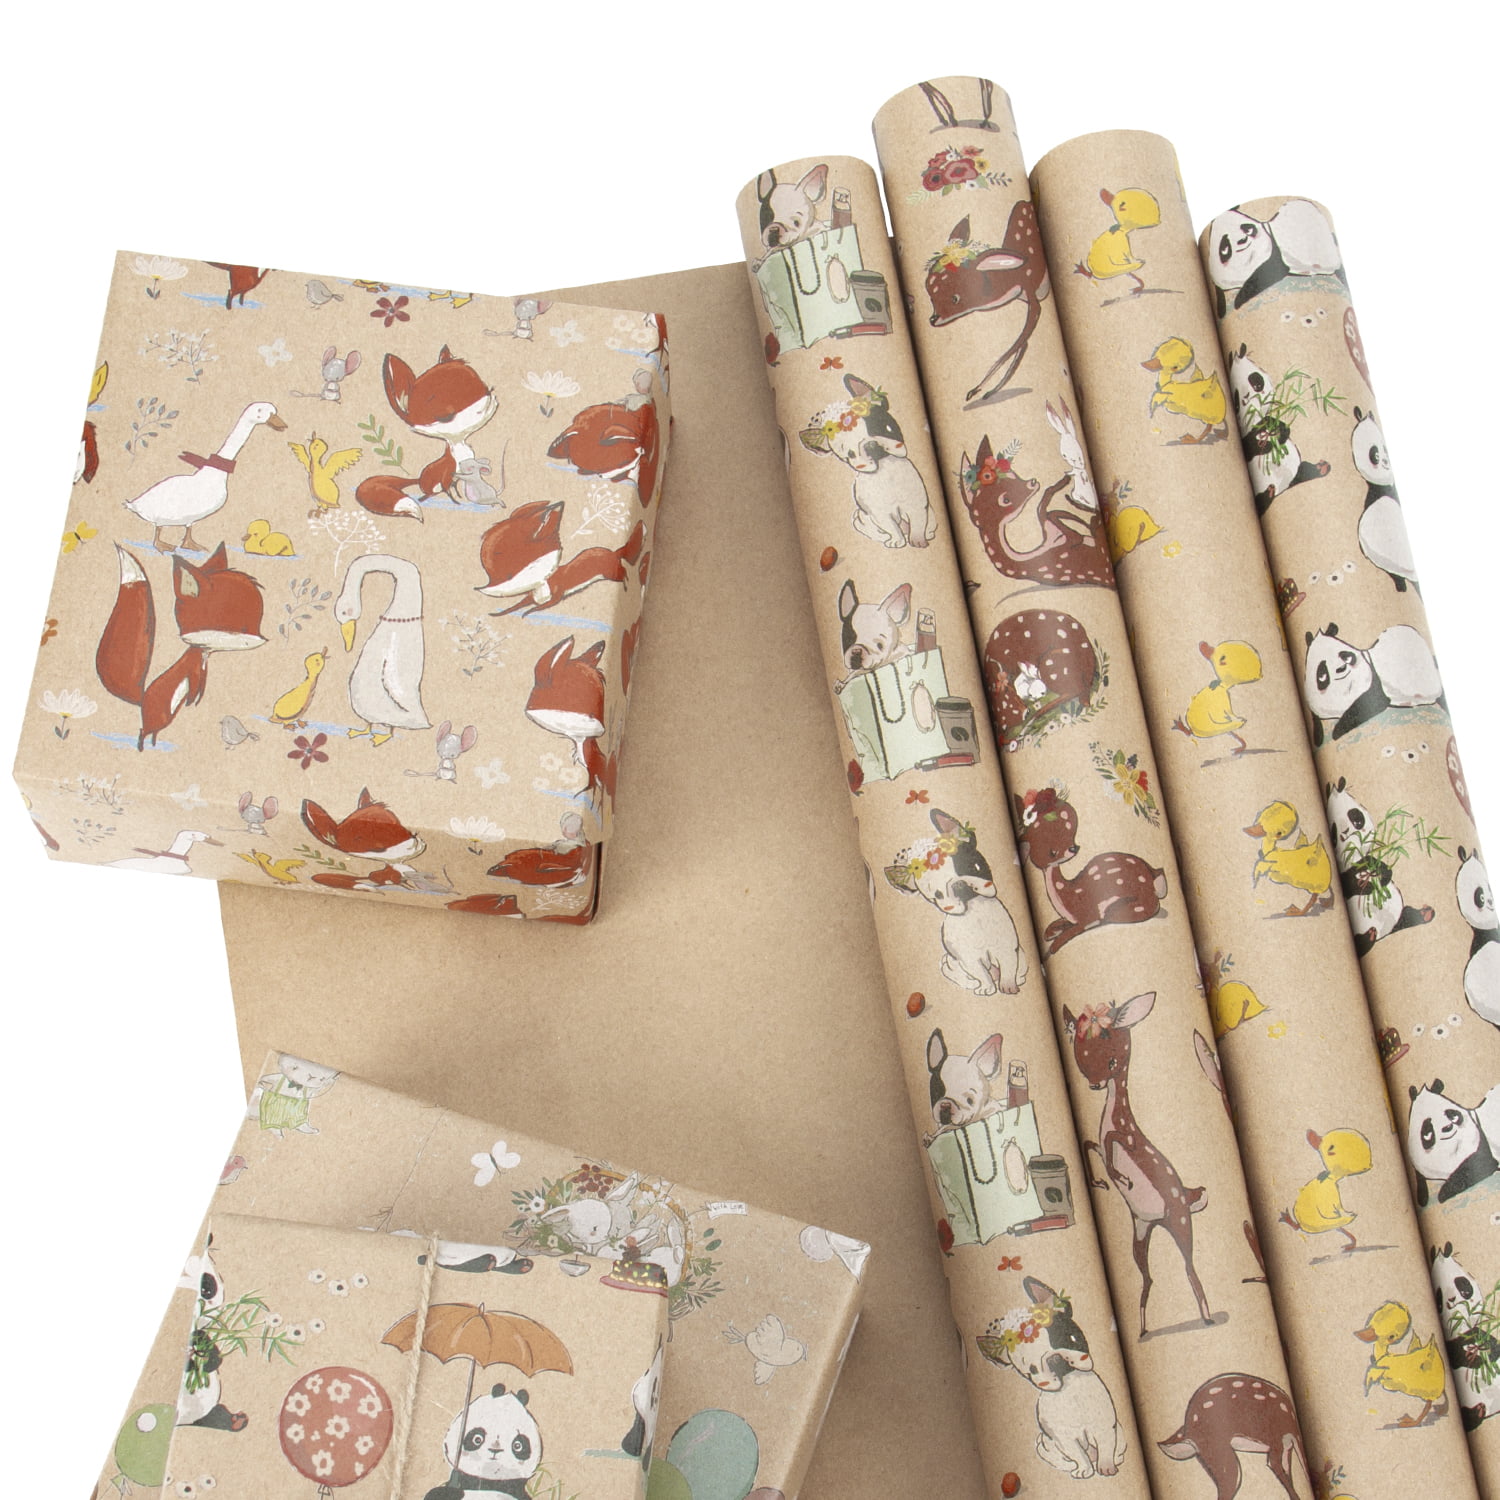  RUSPEPA Christmas Wrapping paper - Brown Kraft Paper with 3D  White Christmas Elements Print Paper - 4 Roll-30Inch X 10Feet Per Roll :  Health & Household